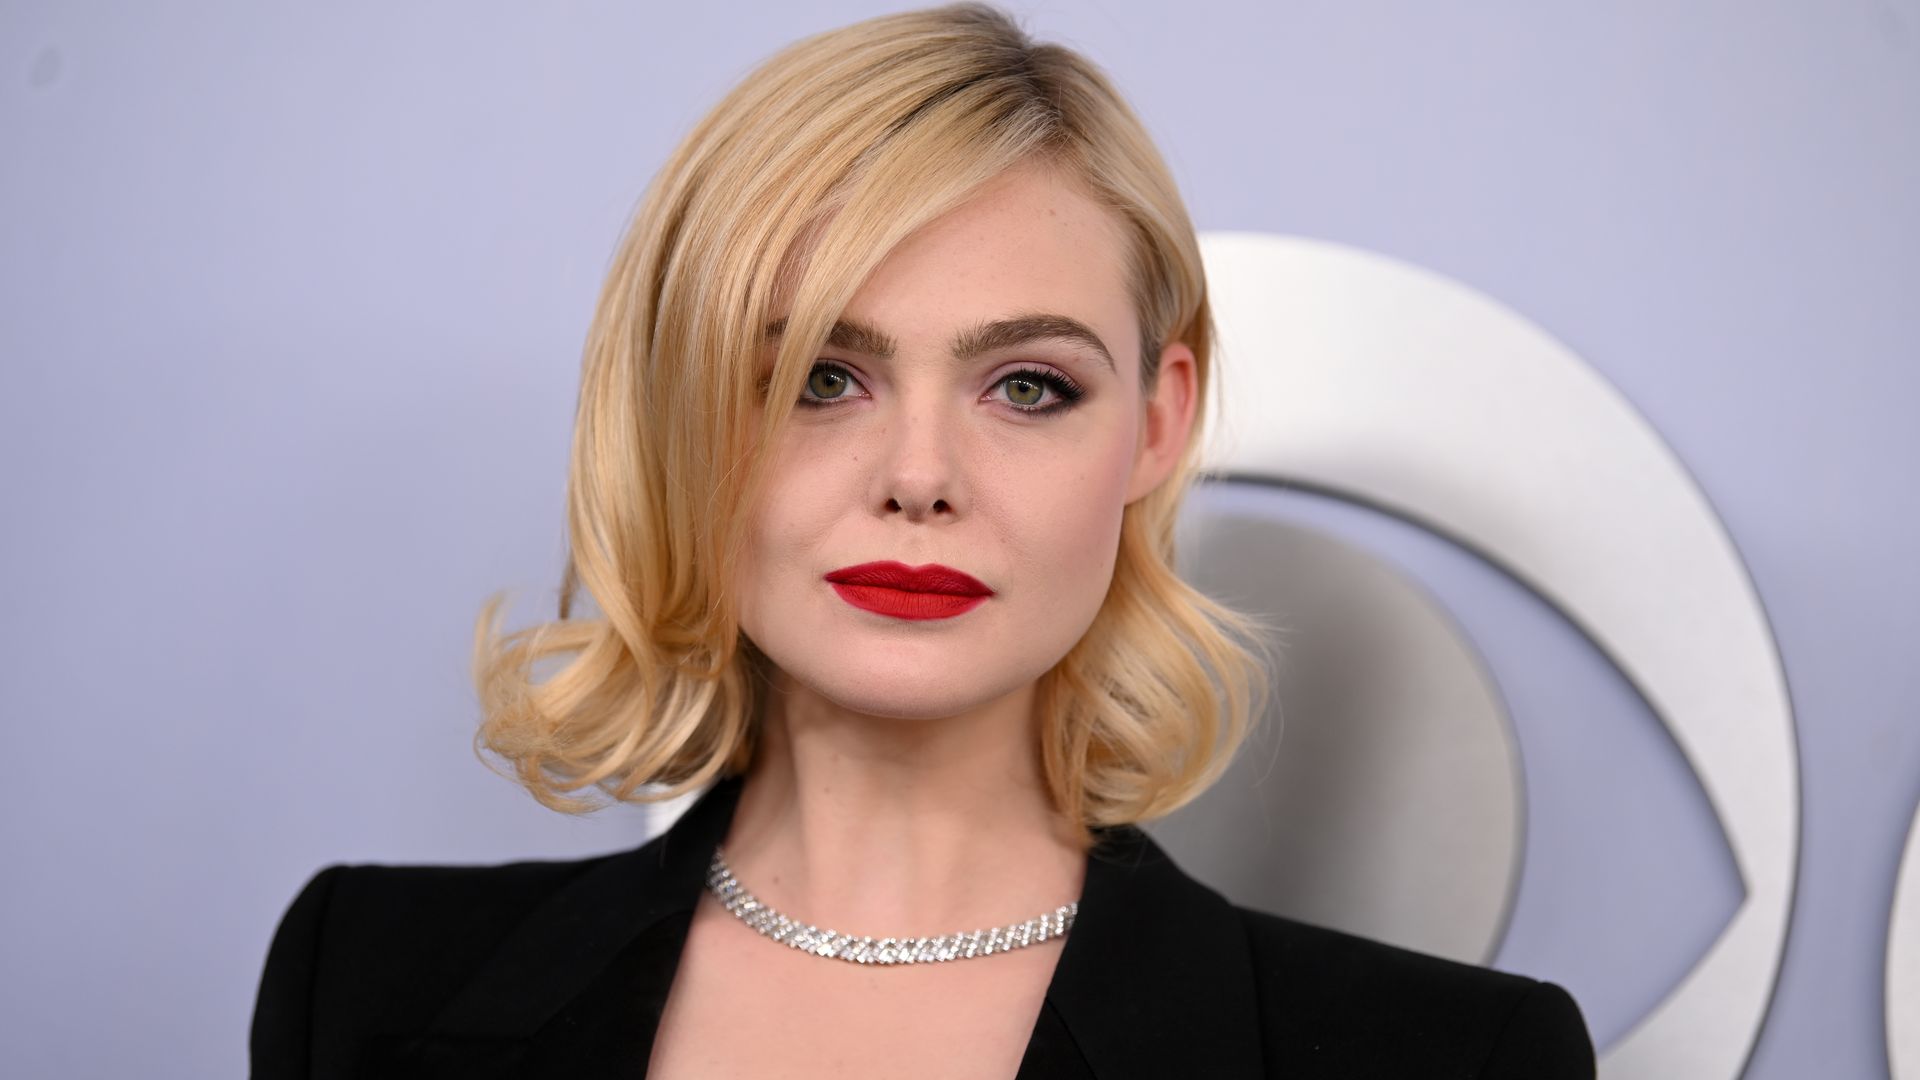 Elle Fanning's plunging suit and red lip is giving major SHE-E-O vibes